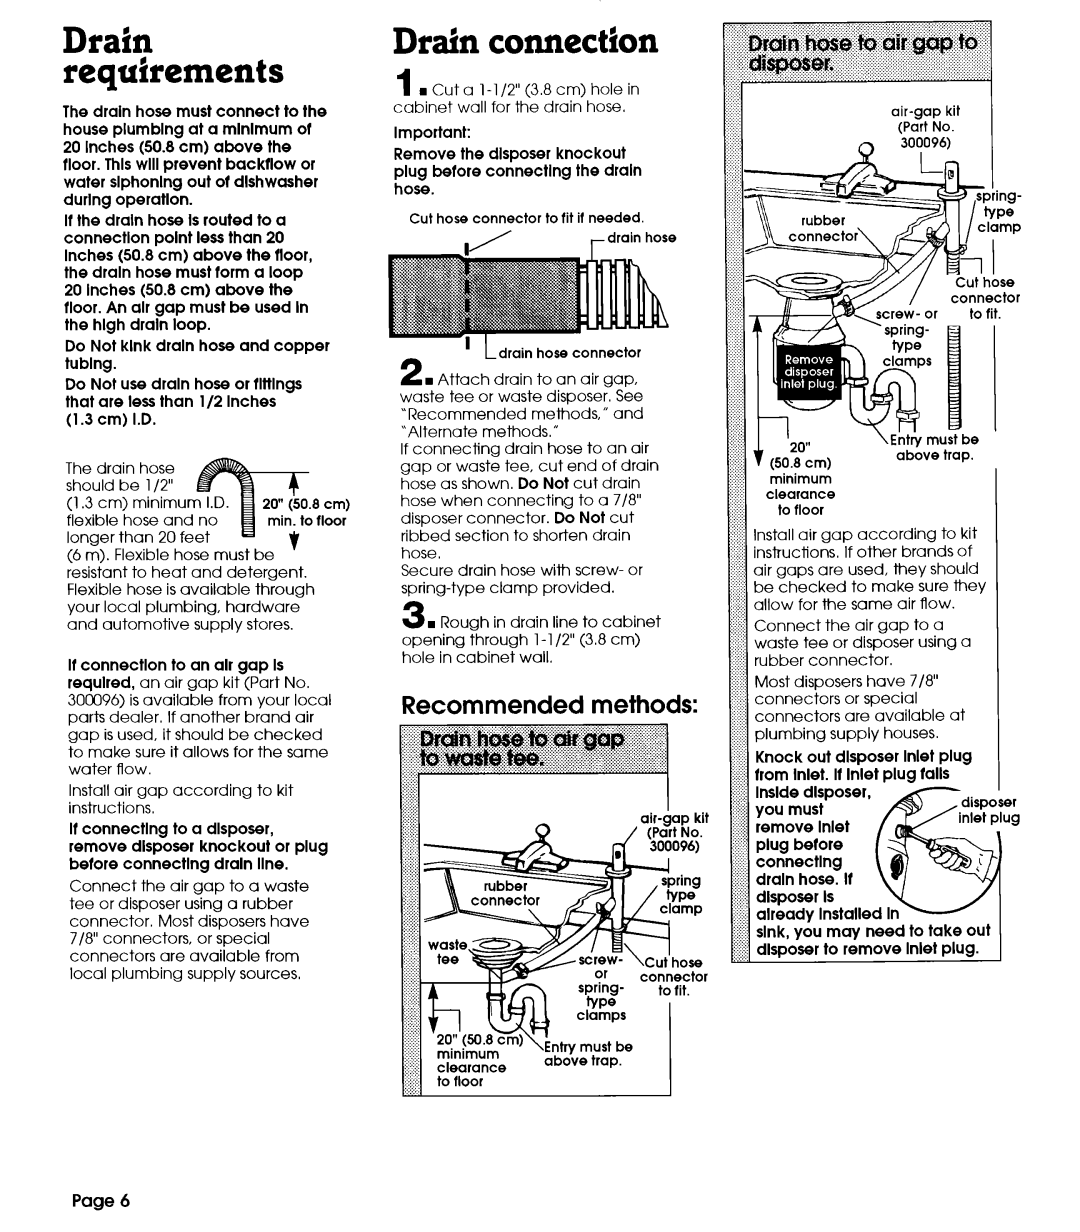 Whirlpool 801 installation instructions Drain connection, Drain requirements, Recommended methods, 7-i-n 